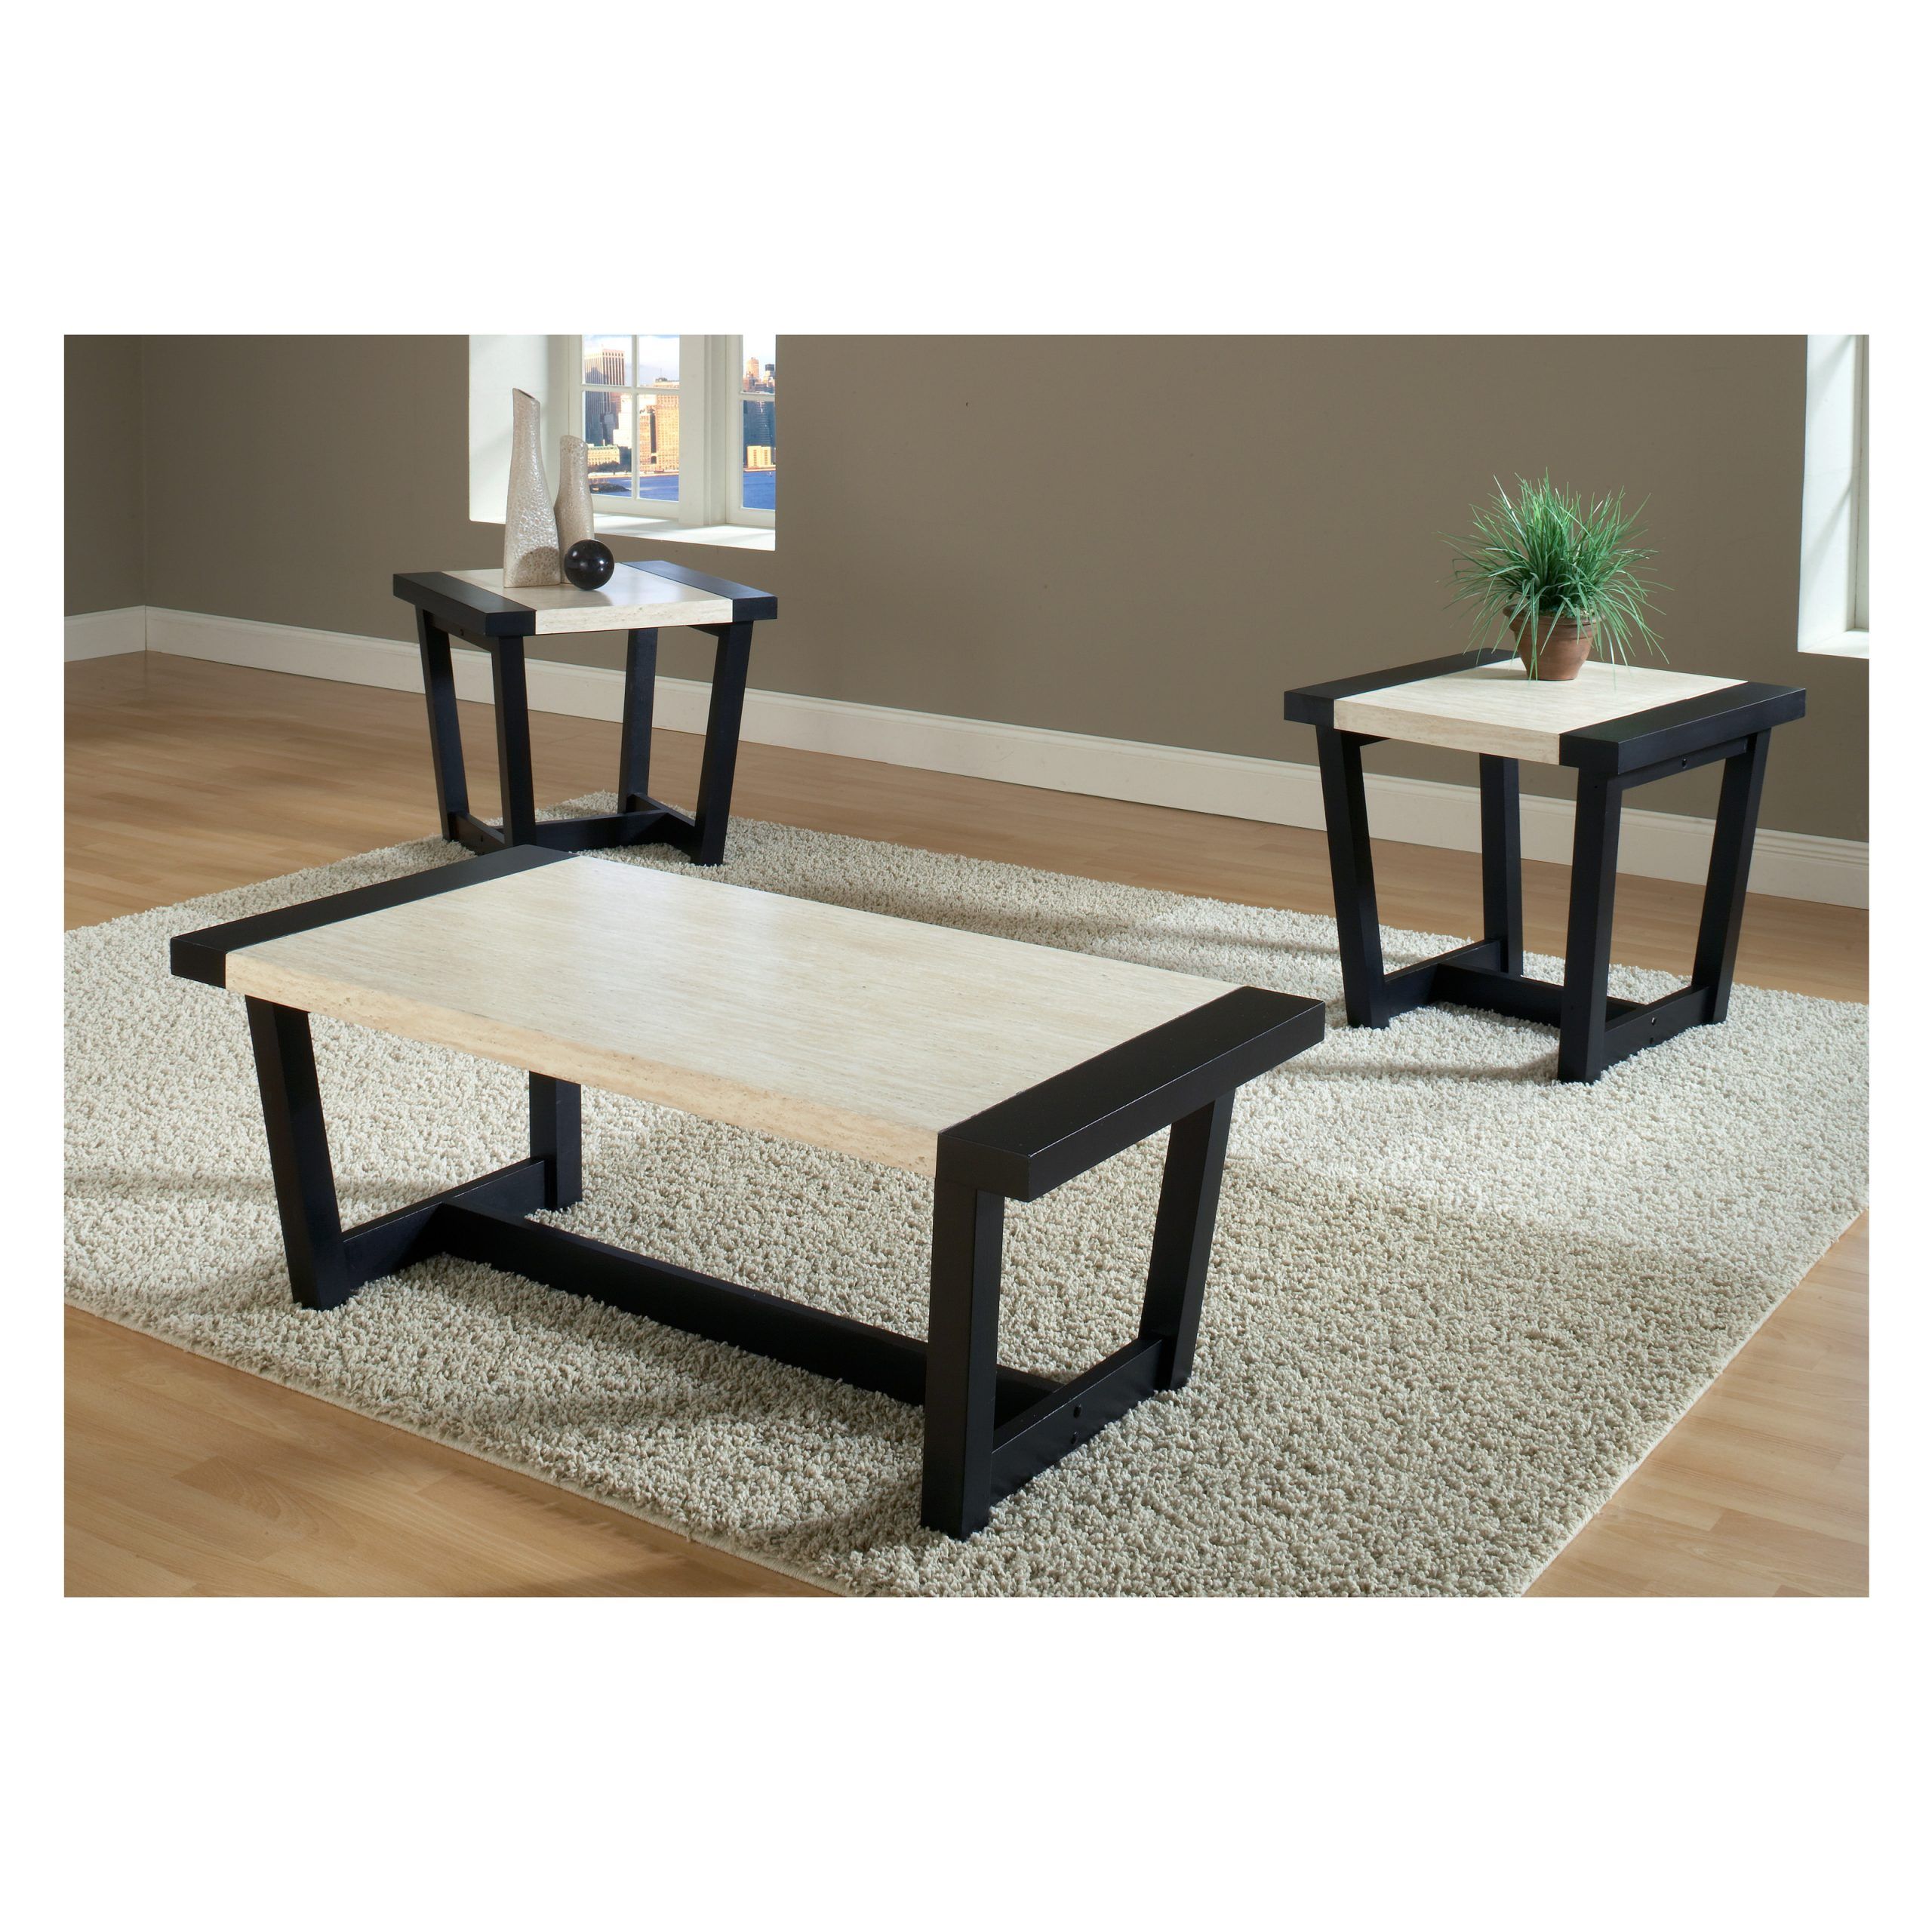 Small White Coffee Table Set – New Arrival Wooden White Round Side In Preferred White Grained Wood Hexagonal Coffee Tables (View 4 of 10)